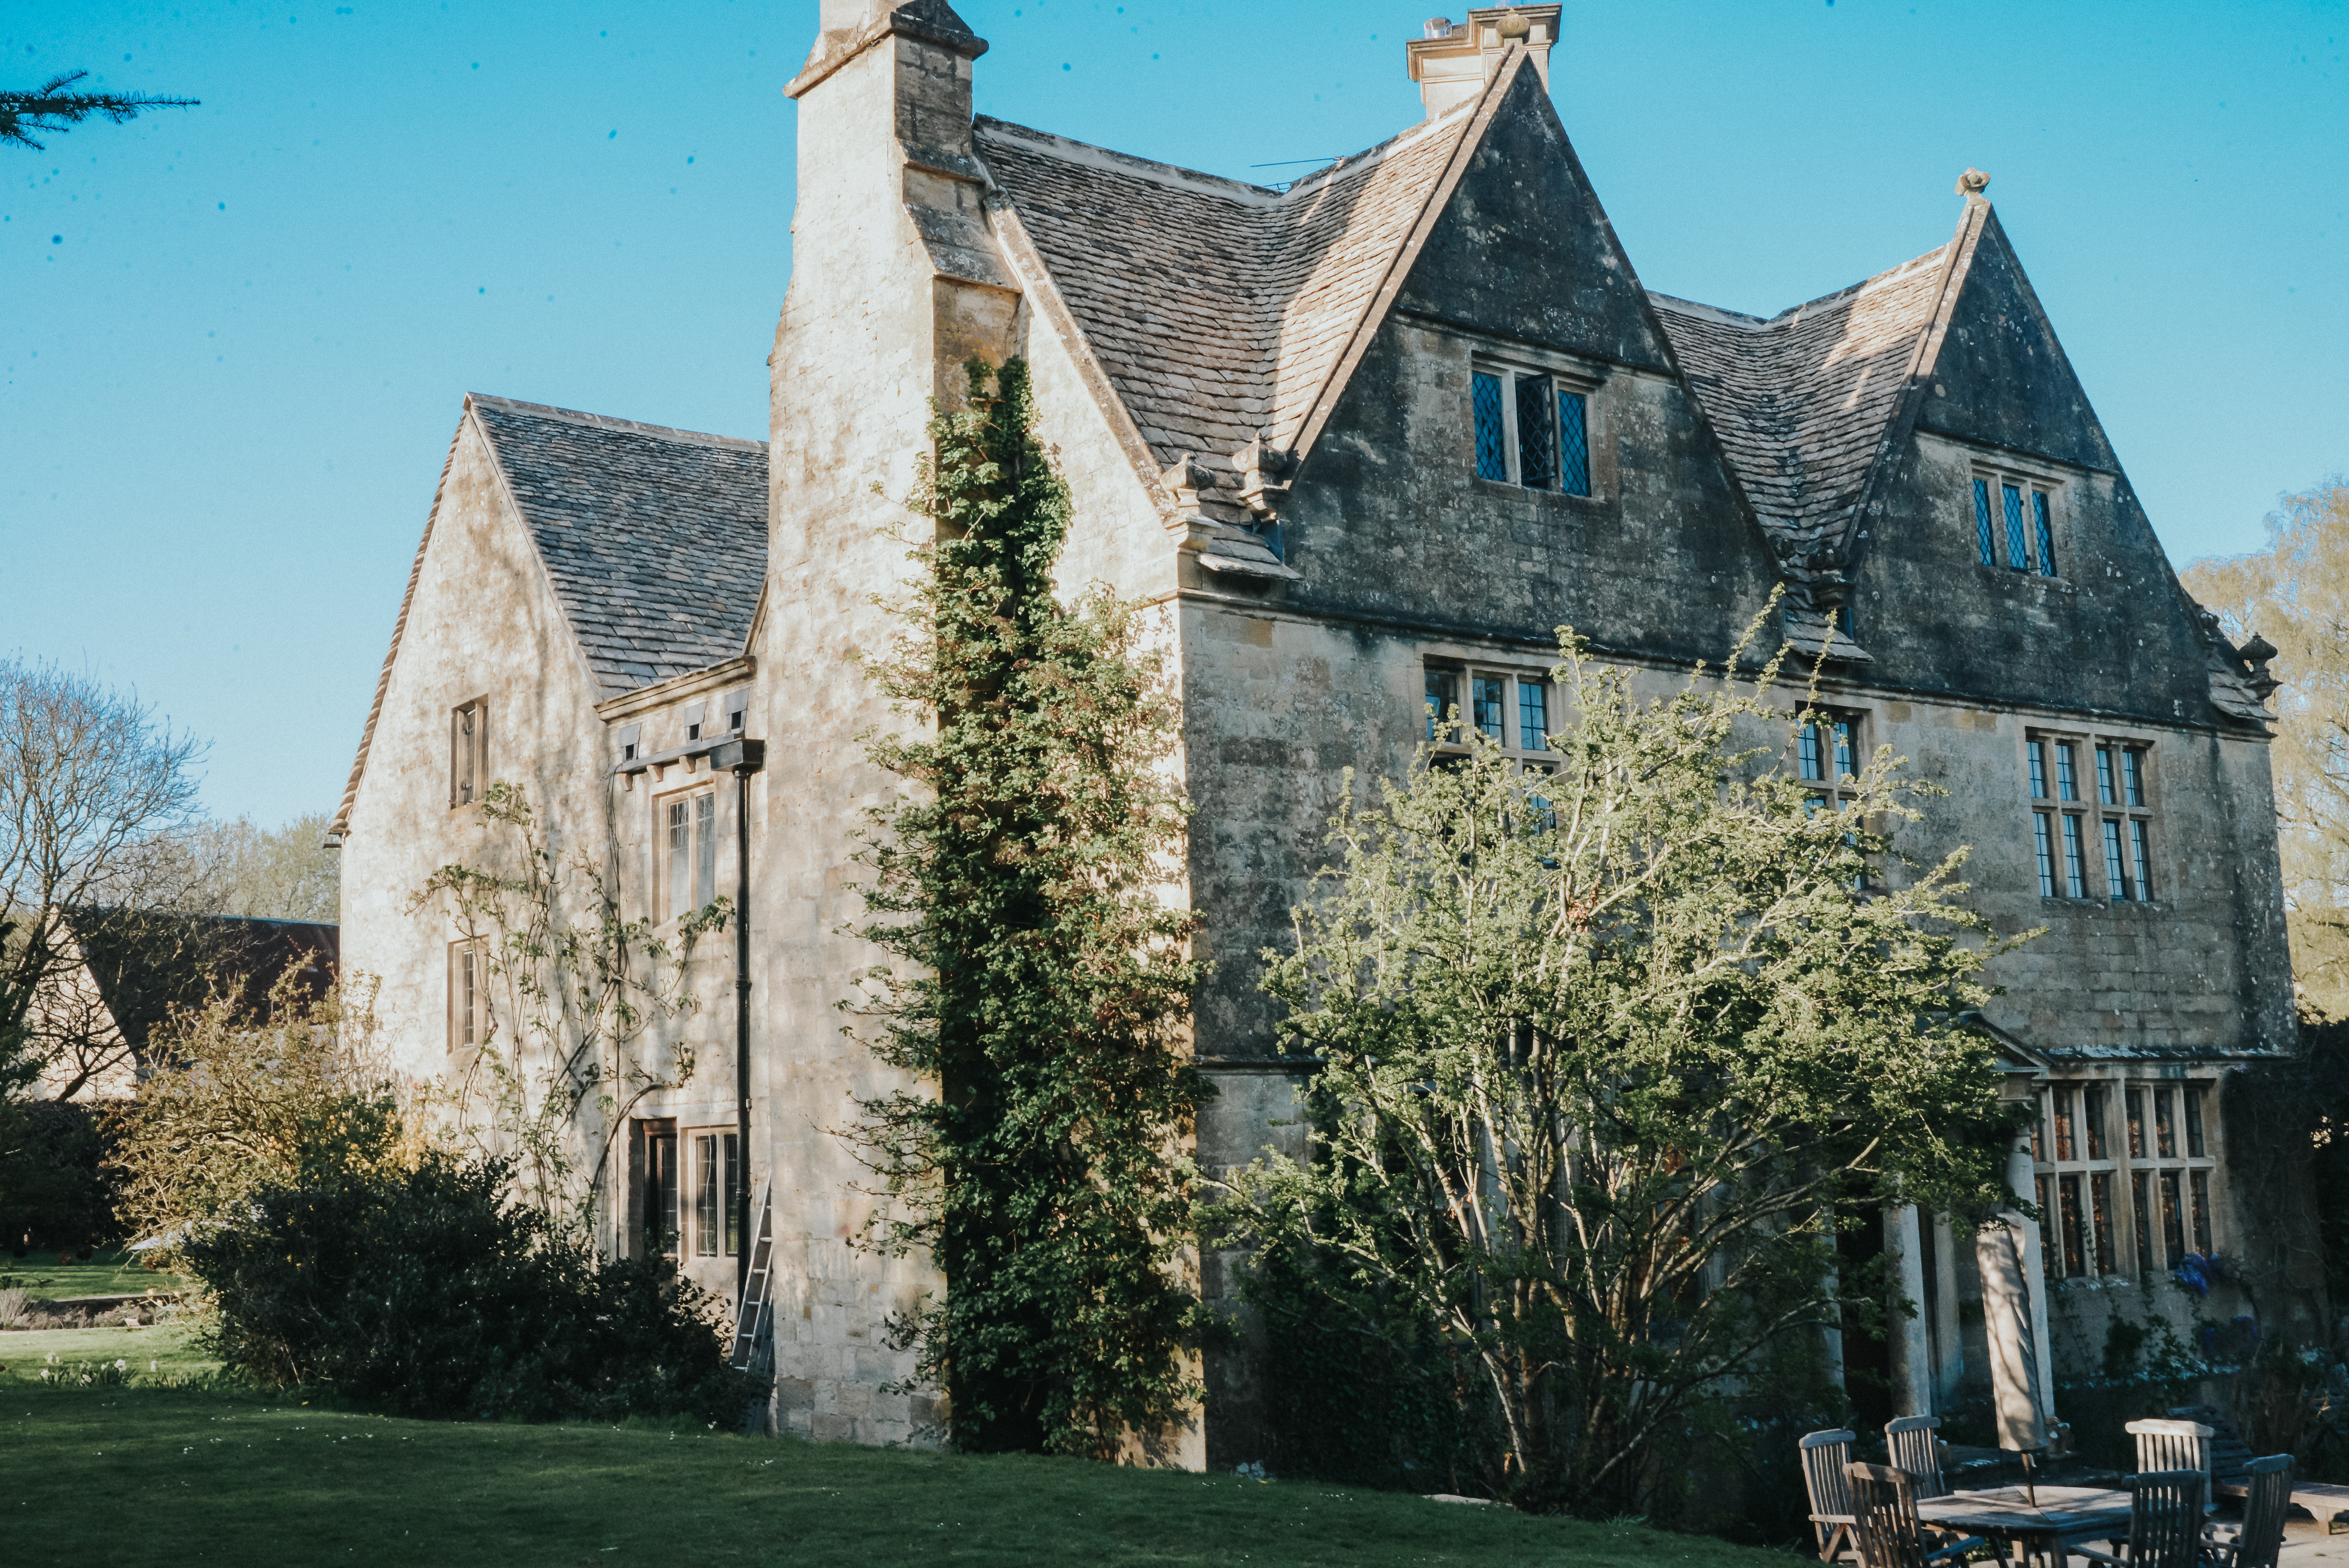 City Girls vs. Nature: a dose of olde English charm in the Cotswolds